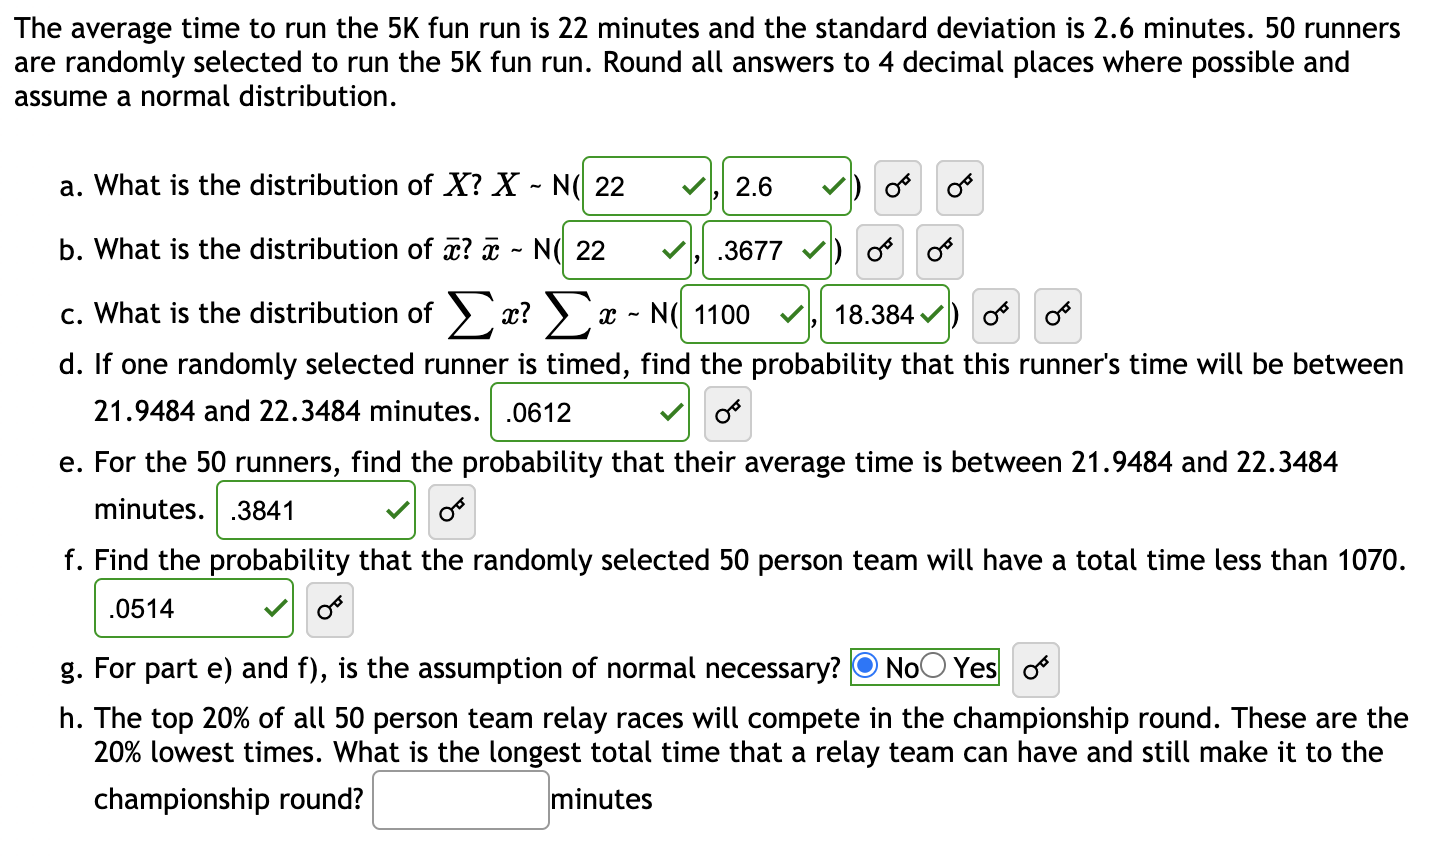 The average time to run the 5K fun run is 22 minutes and the standard deviation is 2.6 minutes. 50 runners
are randomly selected to run the 5K fun run. Round all answers to 4 decimal places where possible and
assume a normal distribution.
a. What is the distribution of X? X - N( 22
2.6
b. What is the distribution of x? ¤ - N( 22
.3677 v) o
Σ
c. What is the distribution of ) x? > a
x - N( 1100
18.384 v) o o
d. If one randomly selected runner is timed, find the probability that this runner's time will be between
21.9484 and 22.3484 minutes. .0612
e. For the 50 runners, find the probability that their average time is between 21.9484 and 22.3484
minutes. .3841
f. Find the probability that the randomly selected 50 person team will have a total time less than 1070.
.0514
g. For part e) and f), is the assumption of normal necessary? O NoO Yes o
h. The top 20% of all 50 person team relay races will compete in the championship round. These are the
20% lowest times. What is the longest total time that a relay team can have and still make it to the
championship round?
minutes
